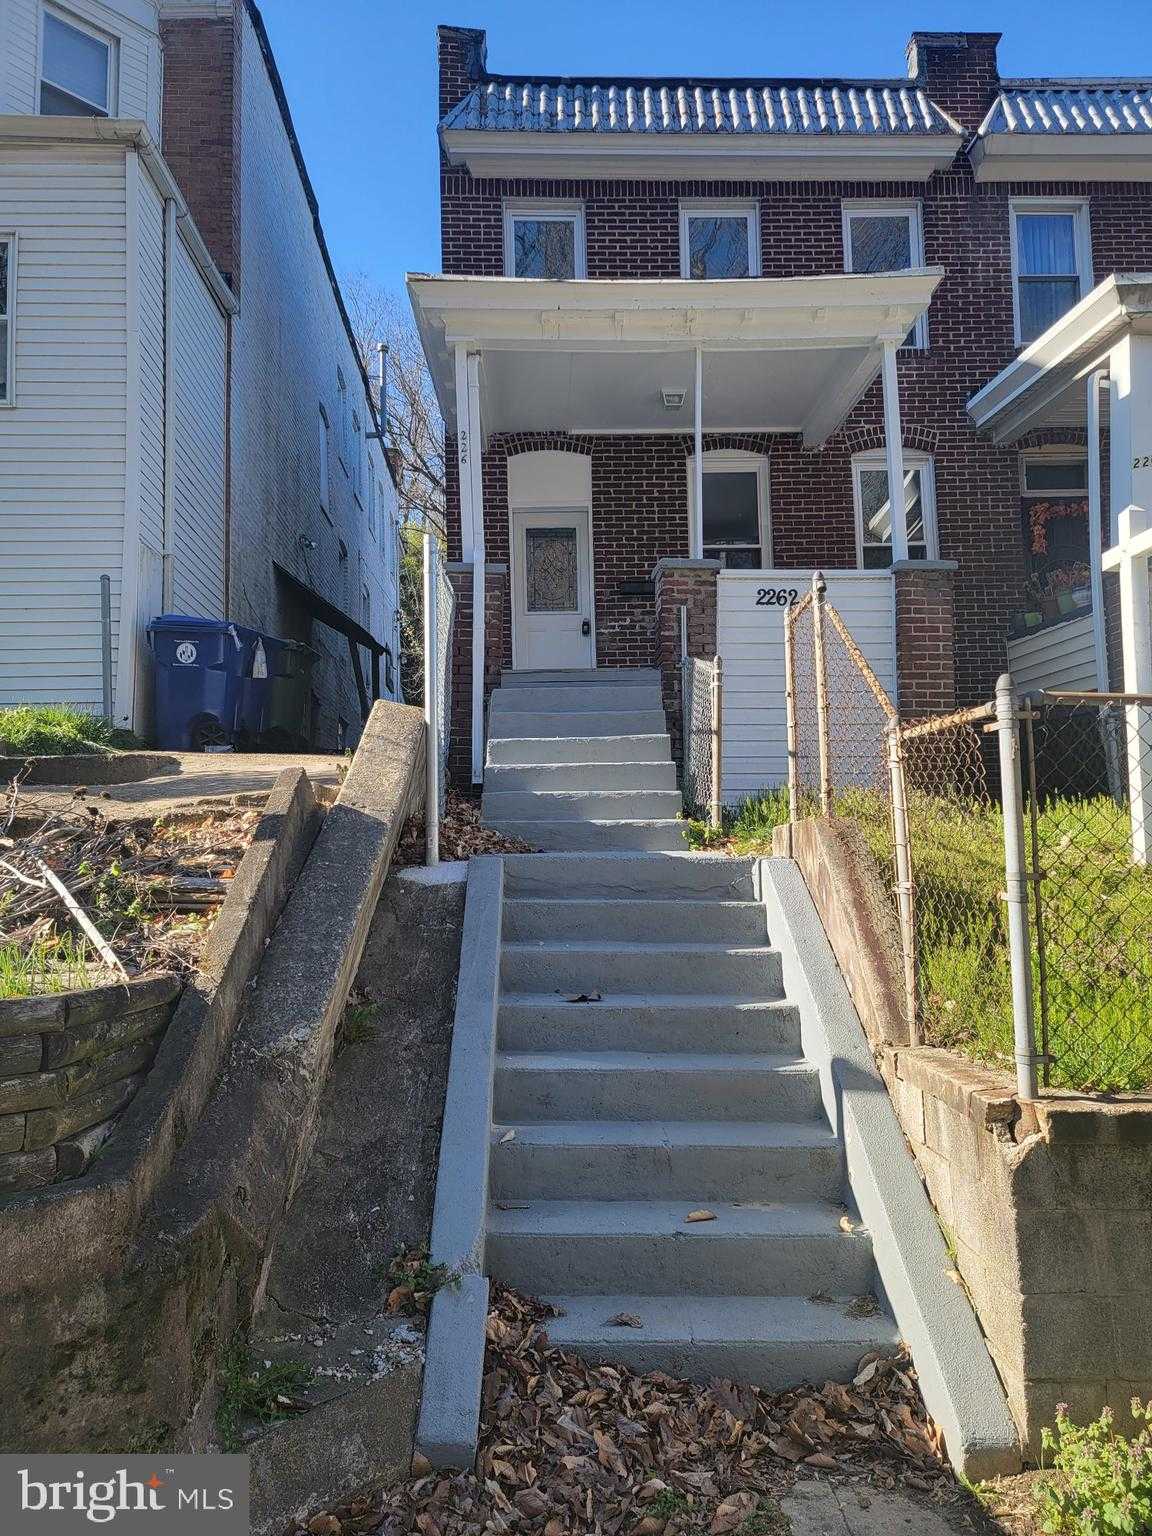 View BALTIMORE, MD 21211 townhome